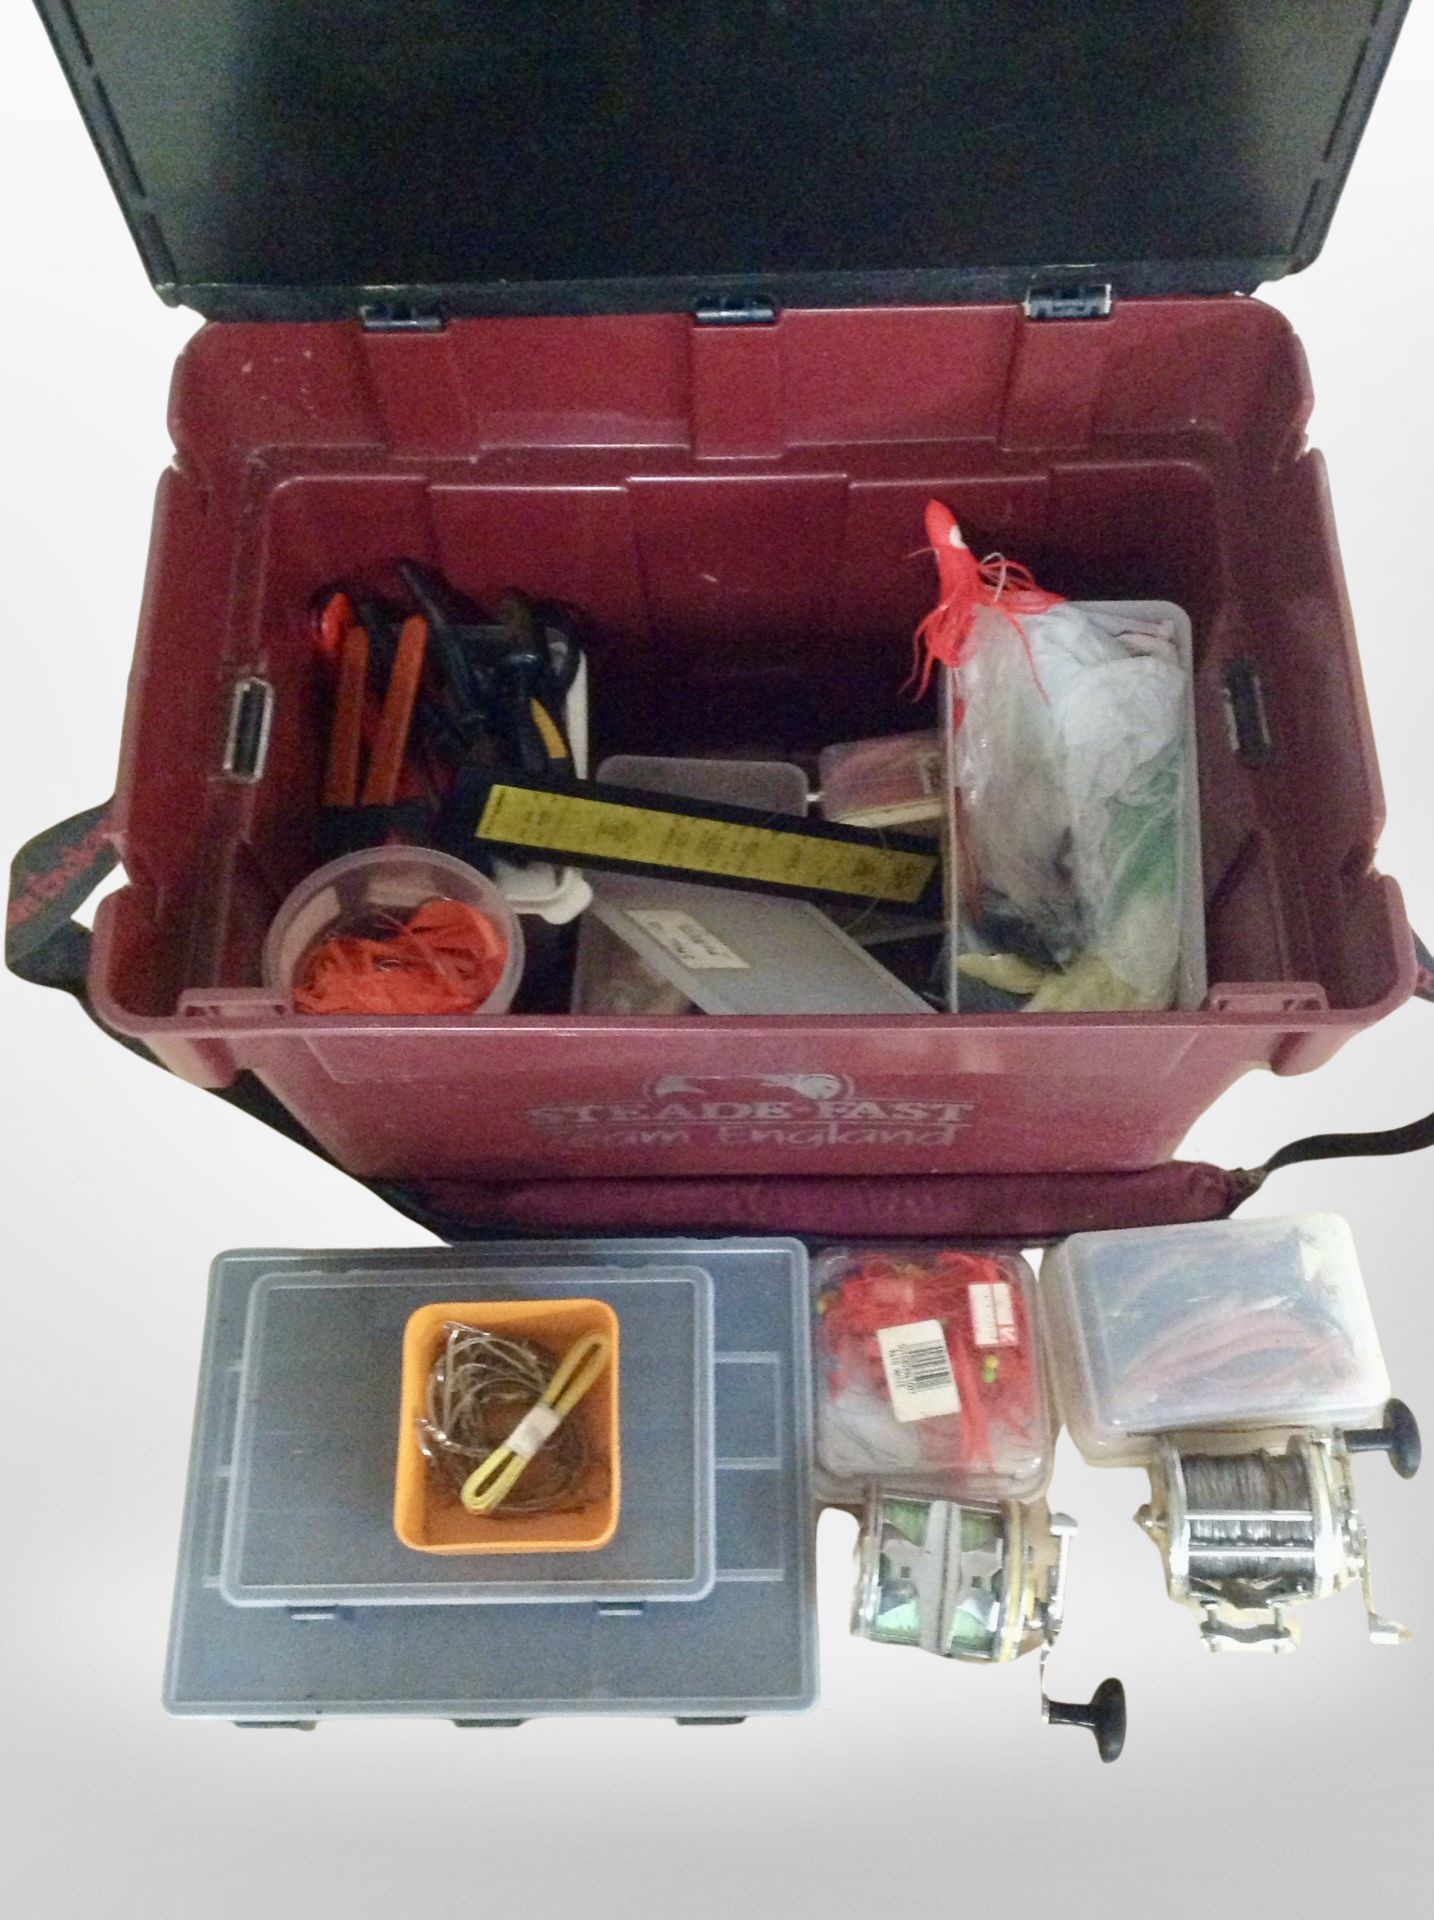 A Steade-Fast fishing box containing assorted fishing equipment including reels, line, lures, tools, - Image 3 of 3